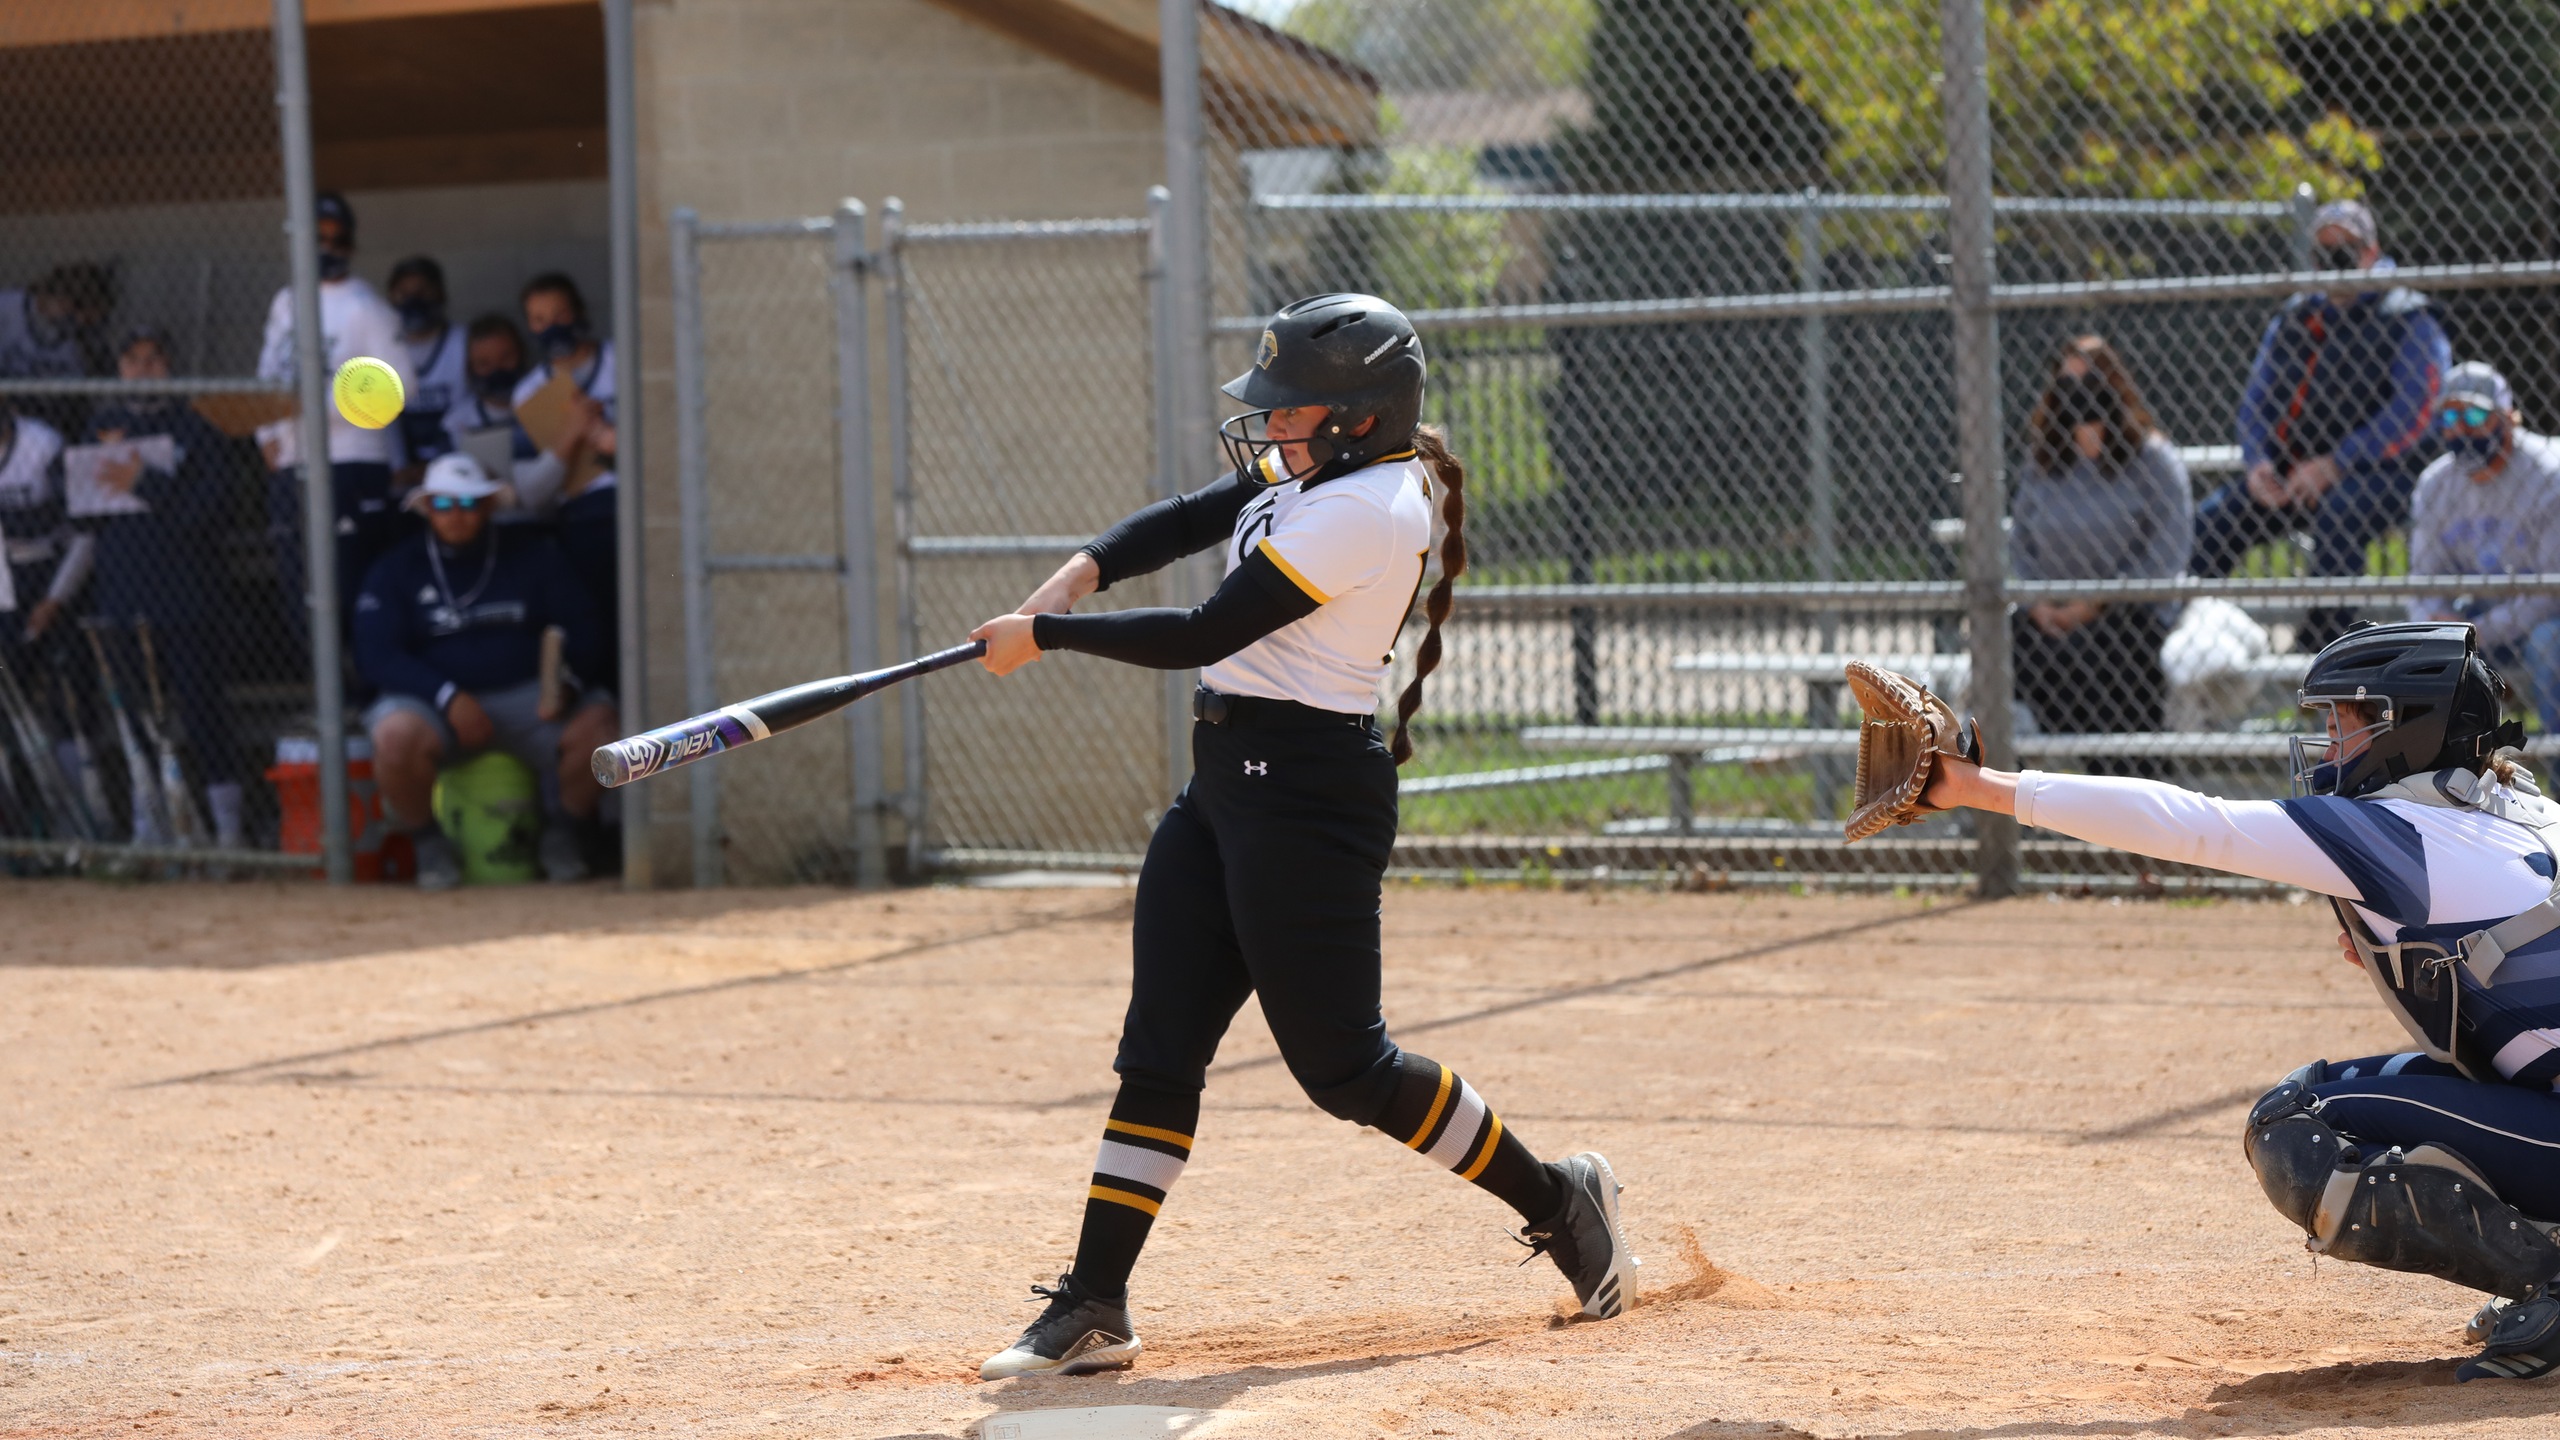 Acacia Tupa sent the Titans' game against the Blue Devils to extra innings by hitting a solo home run in the sixth inning and a two-run double in the seventh.